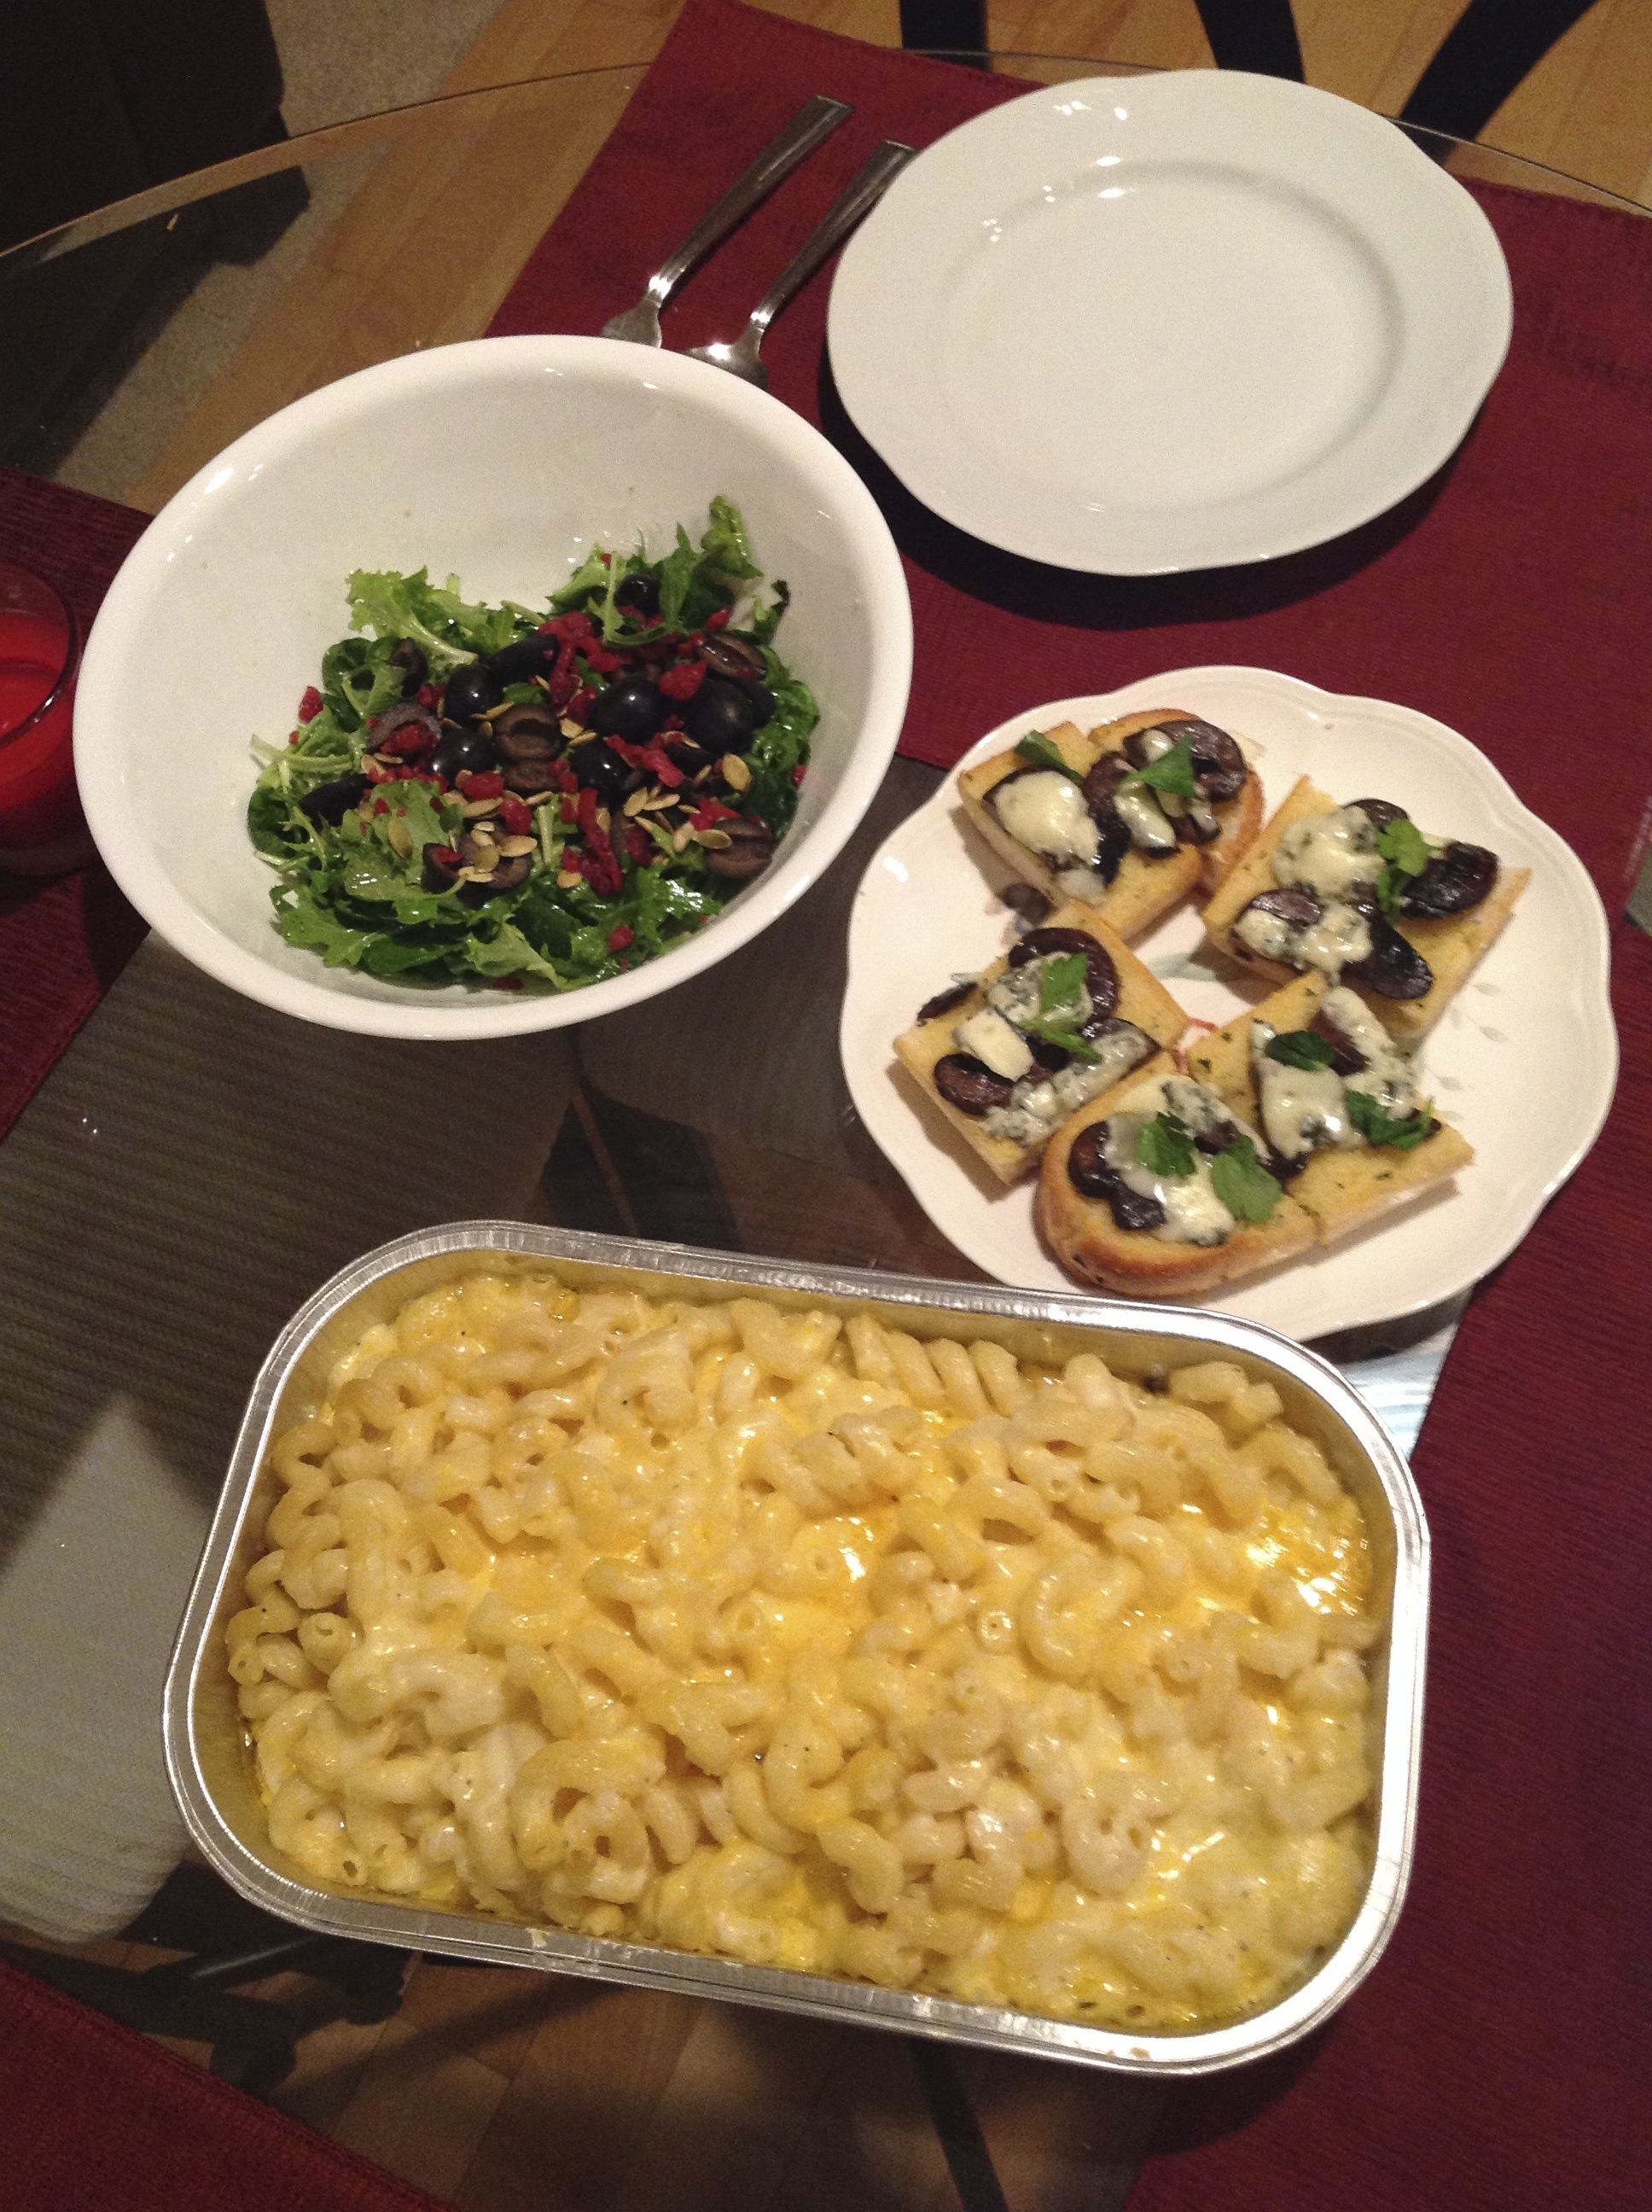 Mac and cheese,salad,mushroom and blue cheese crostini (macandcheese from Costco)